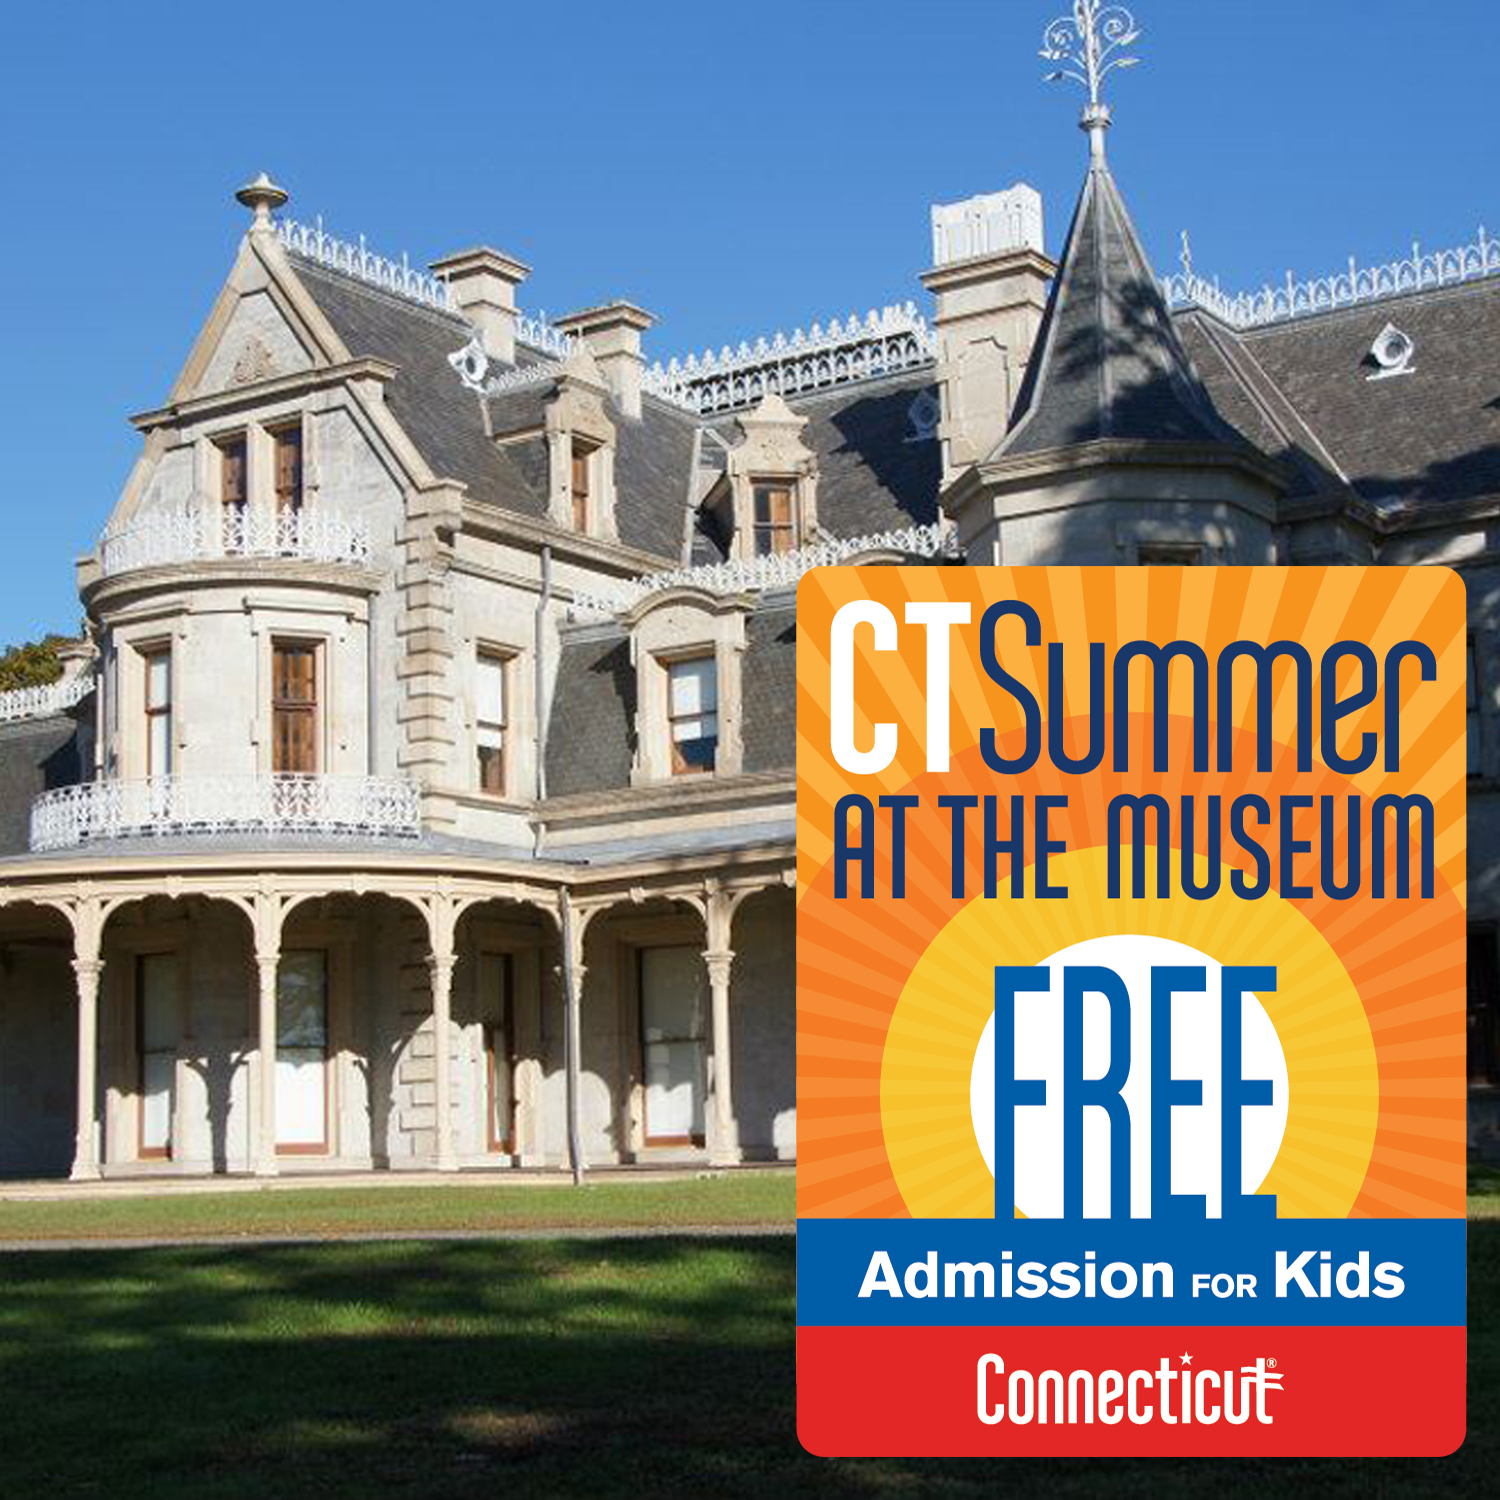 CT Summer at the Museum Free Admission for Kids! The Lockwood